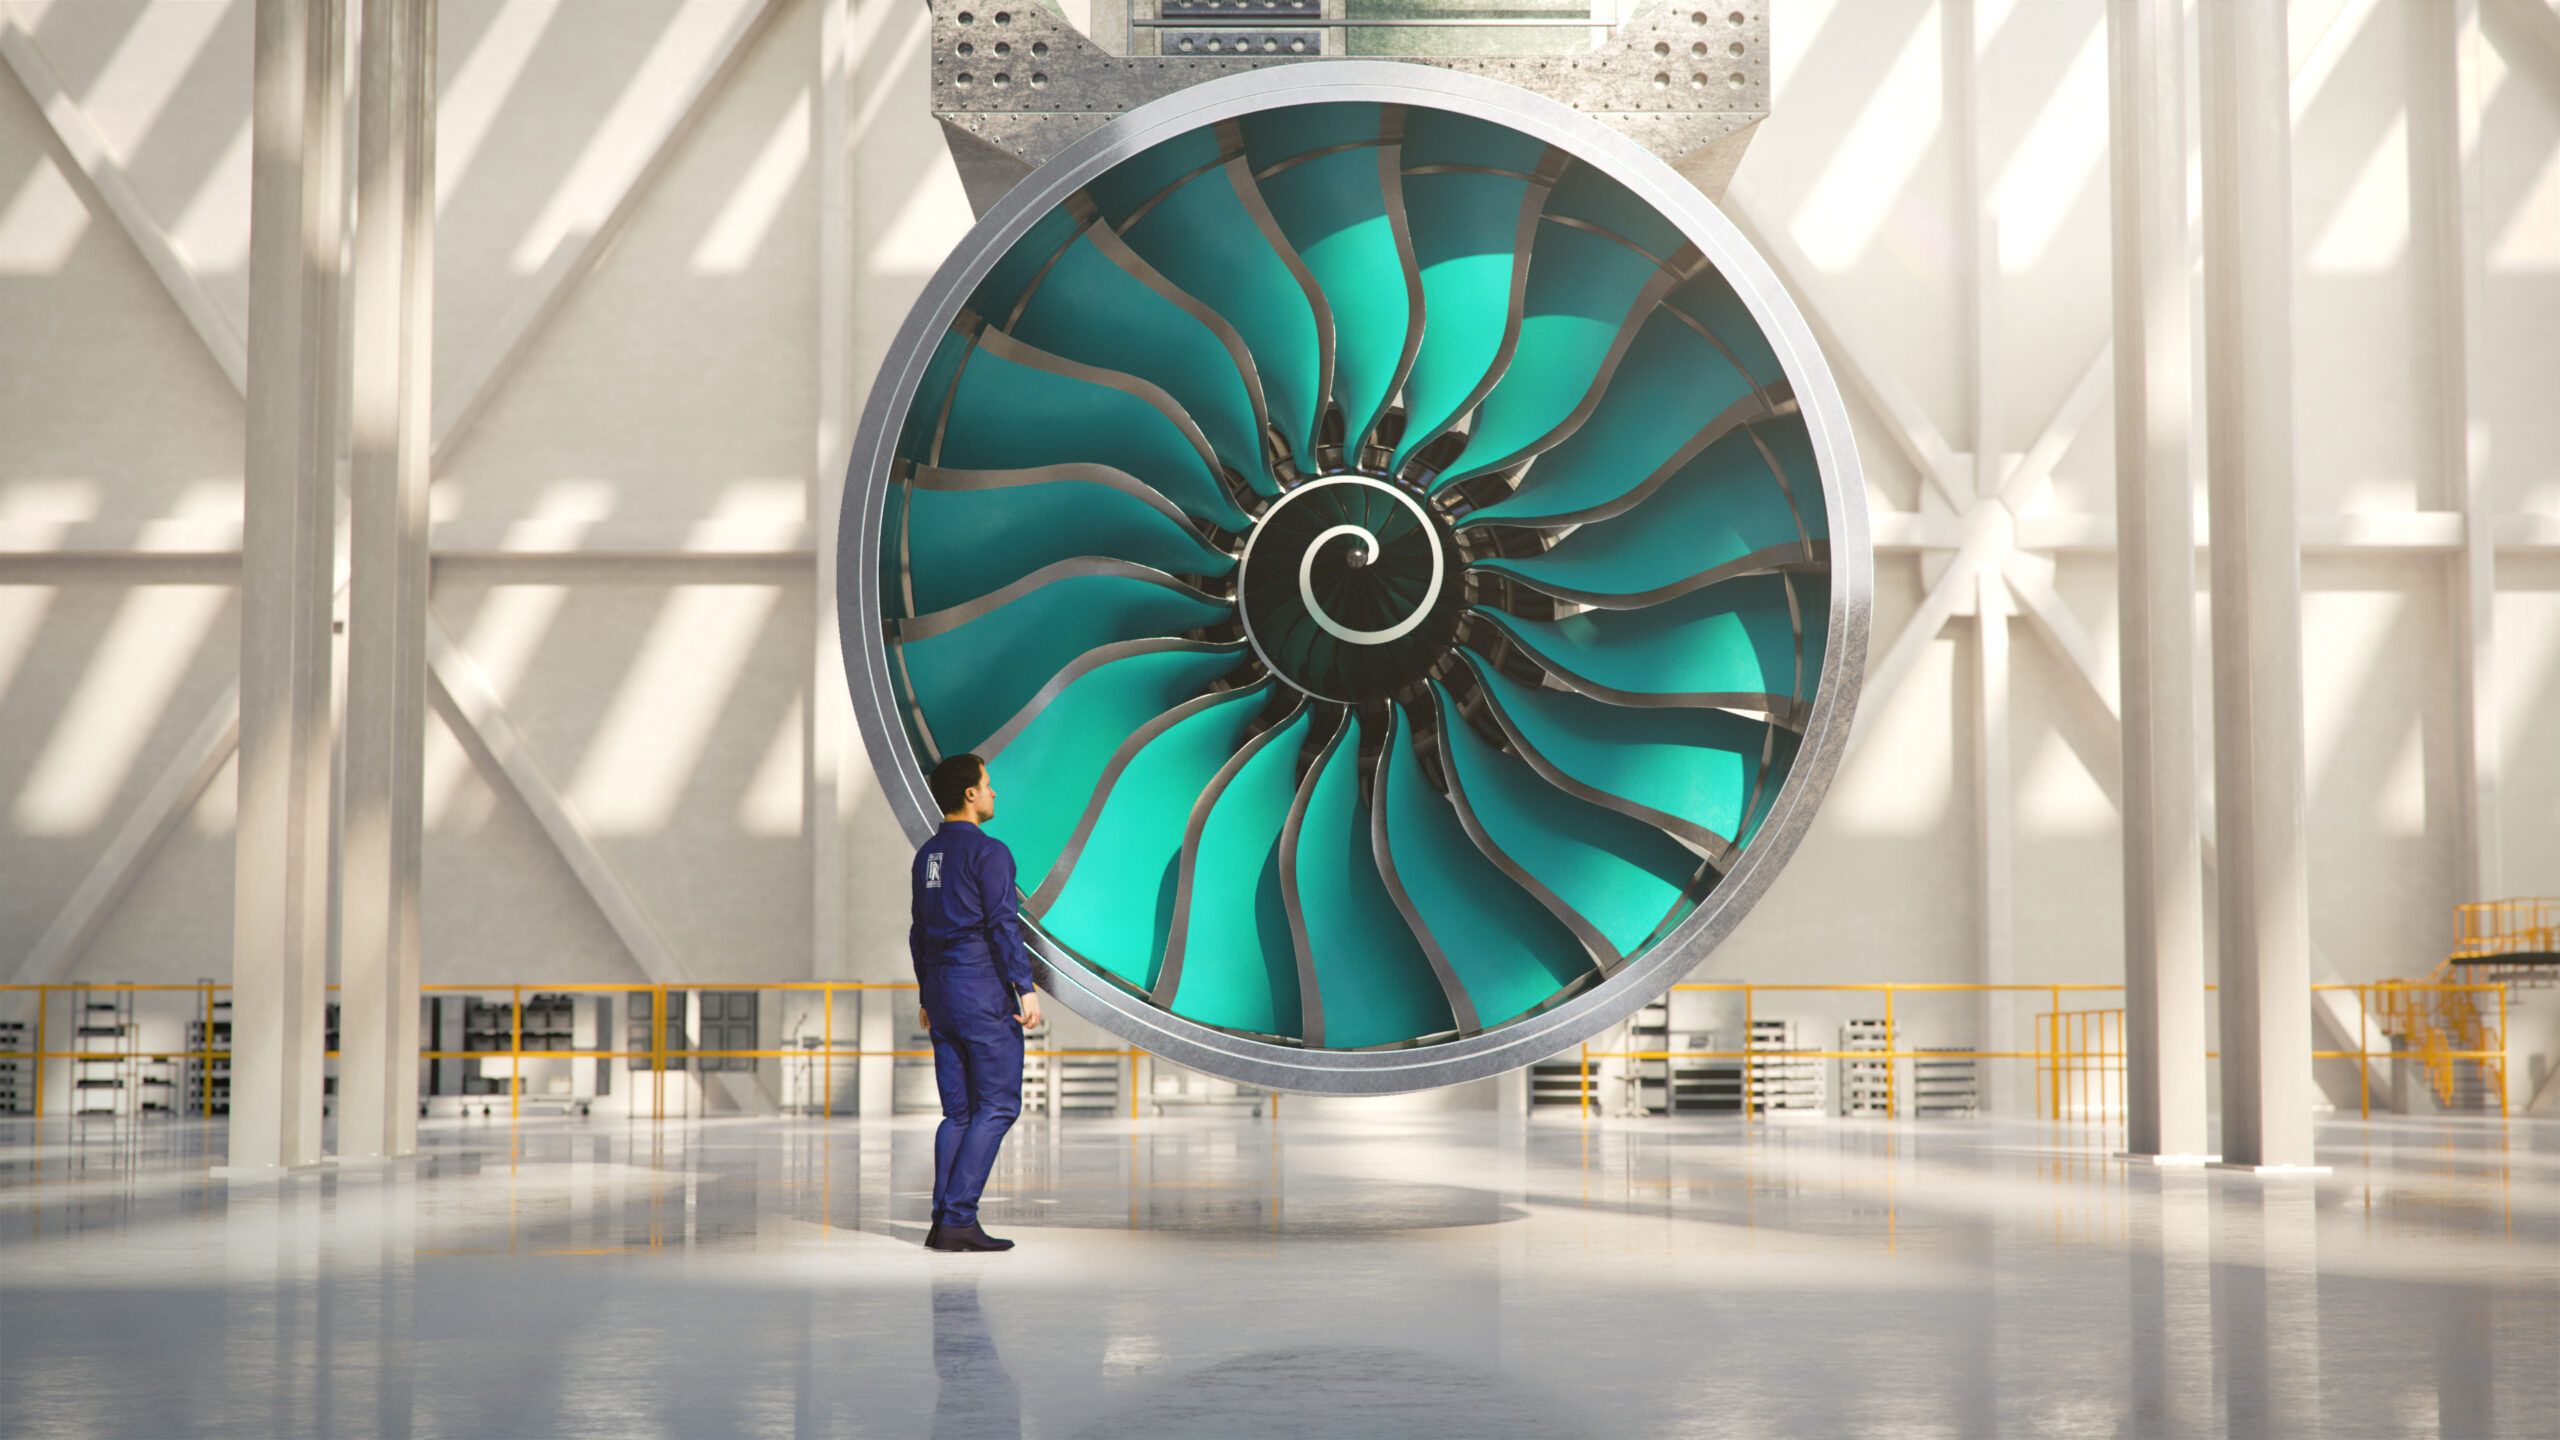 A look into the largest jet engine ever made who will beat the giant   AeroTime